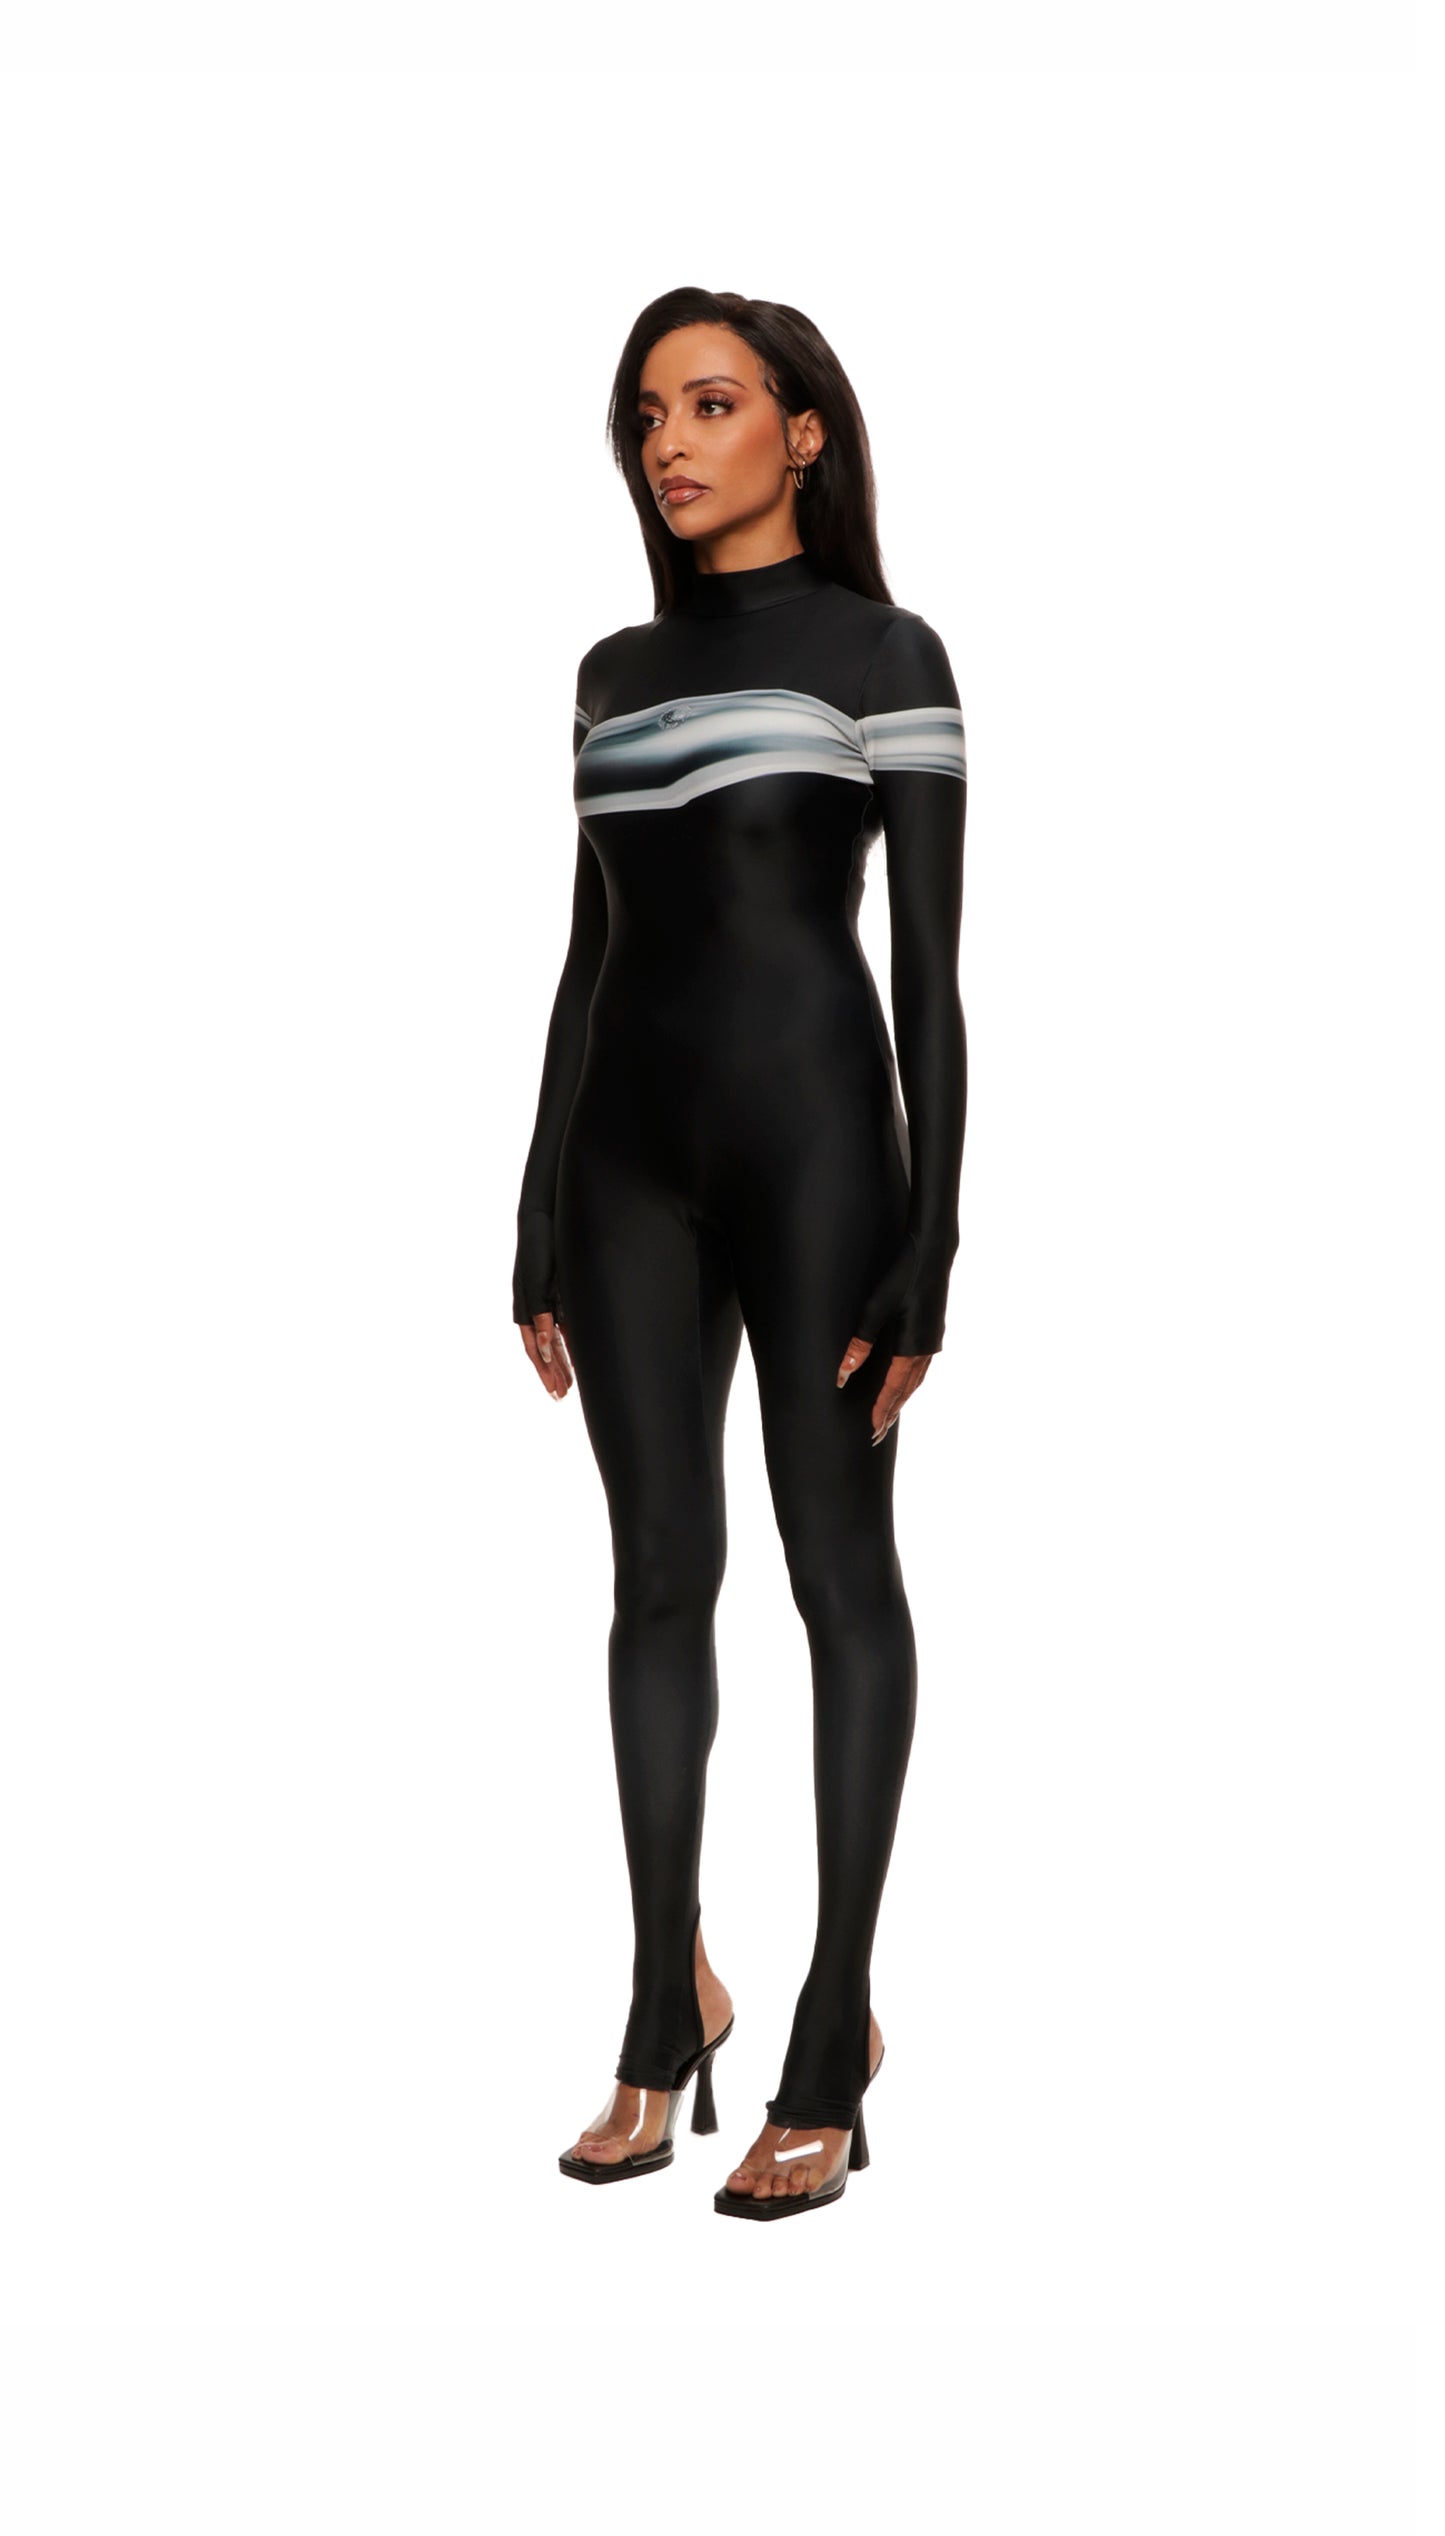 Woman wears black printed wetsuit or catsuit with chrome detail across chest and QR logo with heel cutout